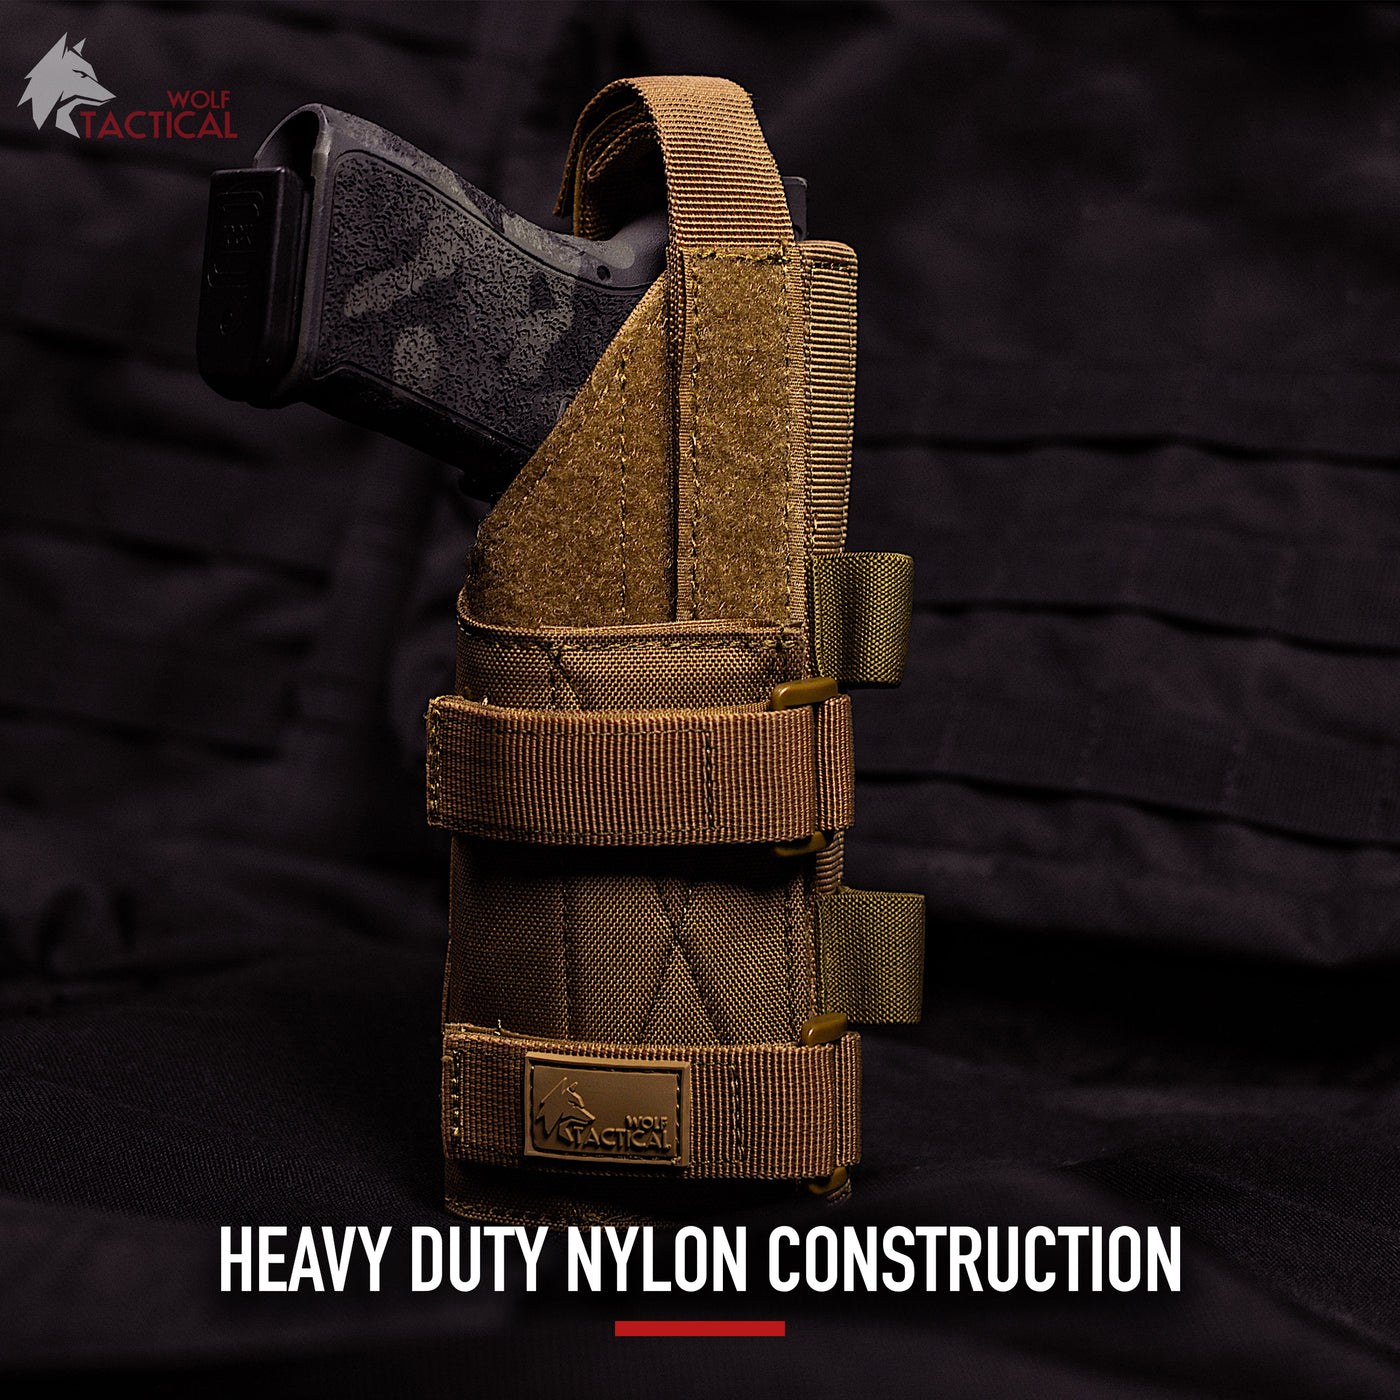 MOLLE Holster